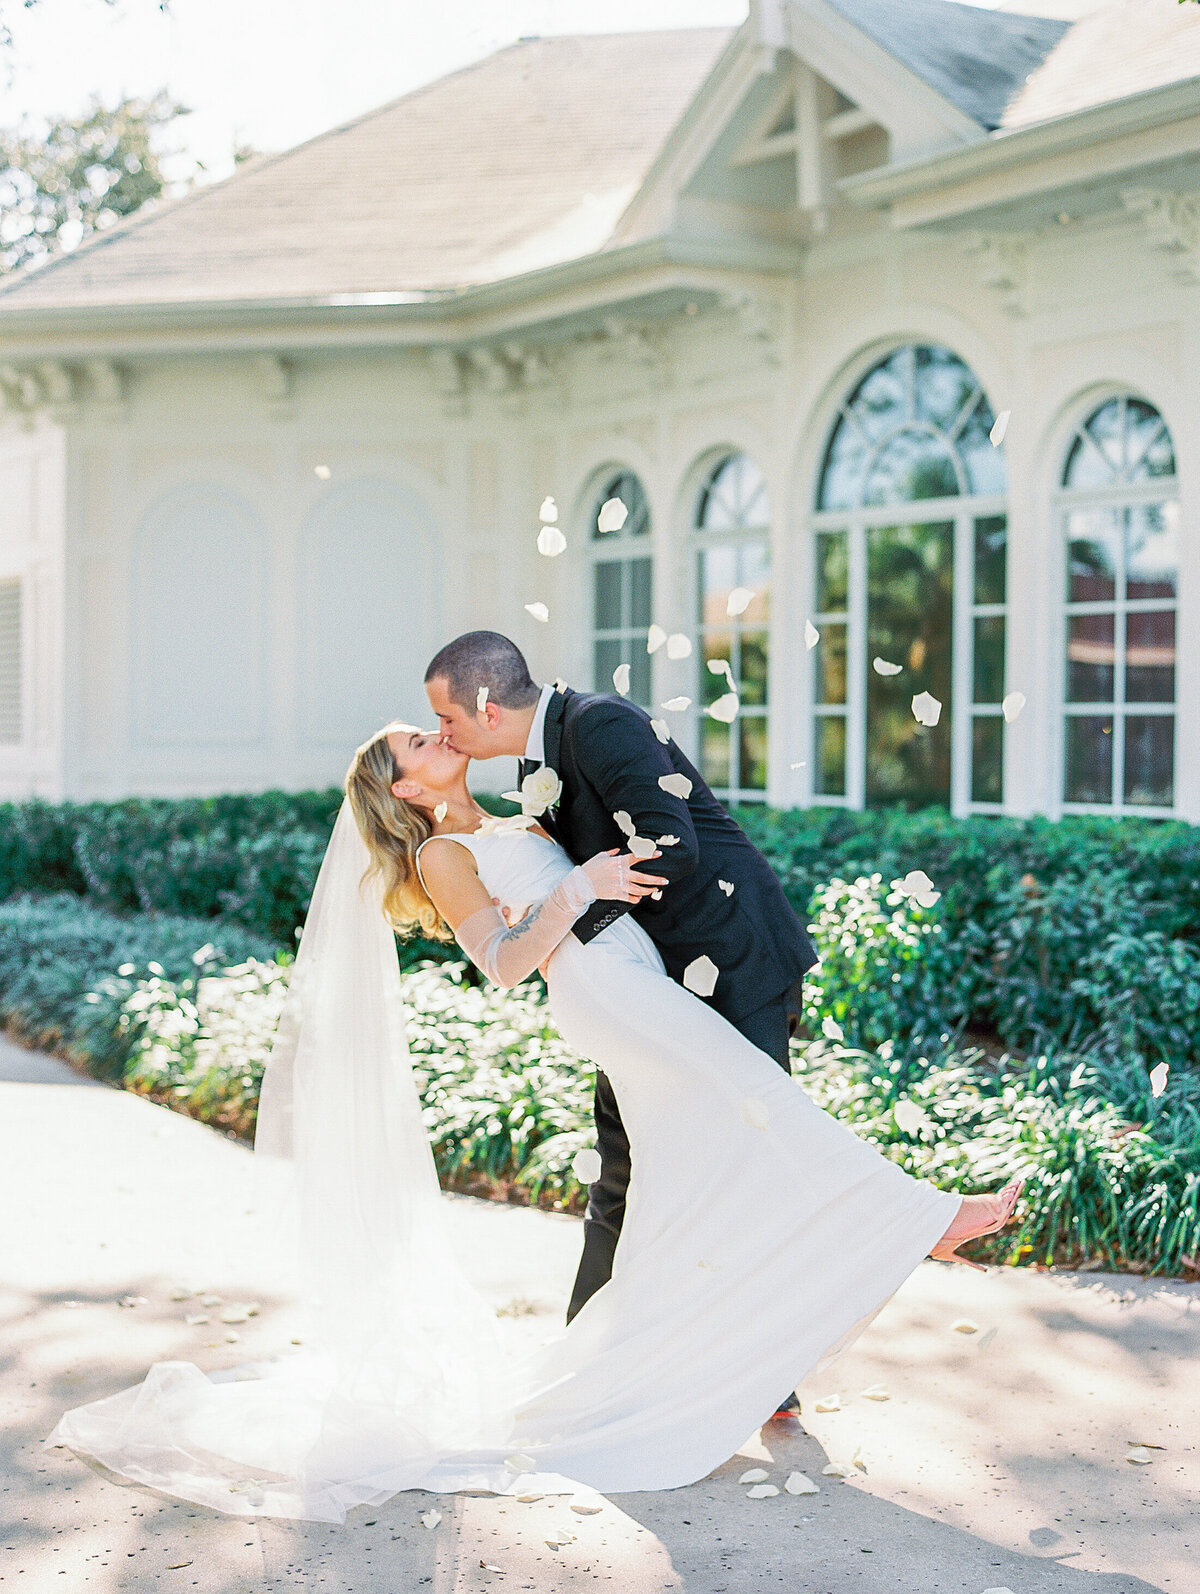 KatieTraufferPhotography- Emily and Miguel Wedding- 551